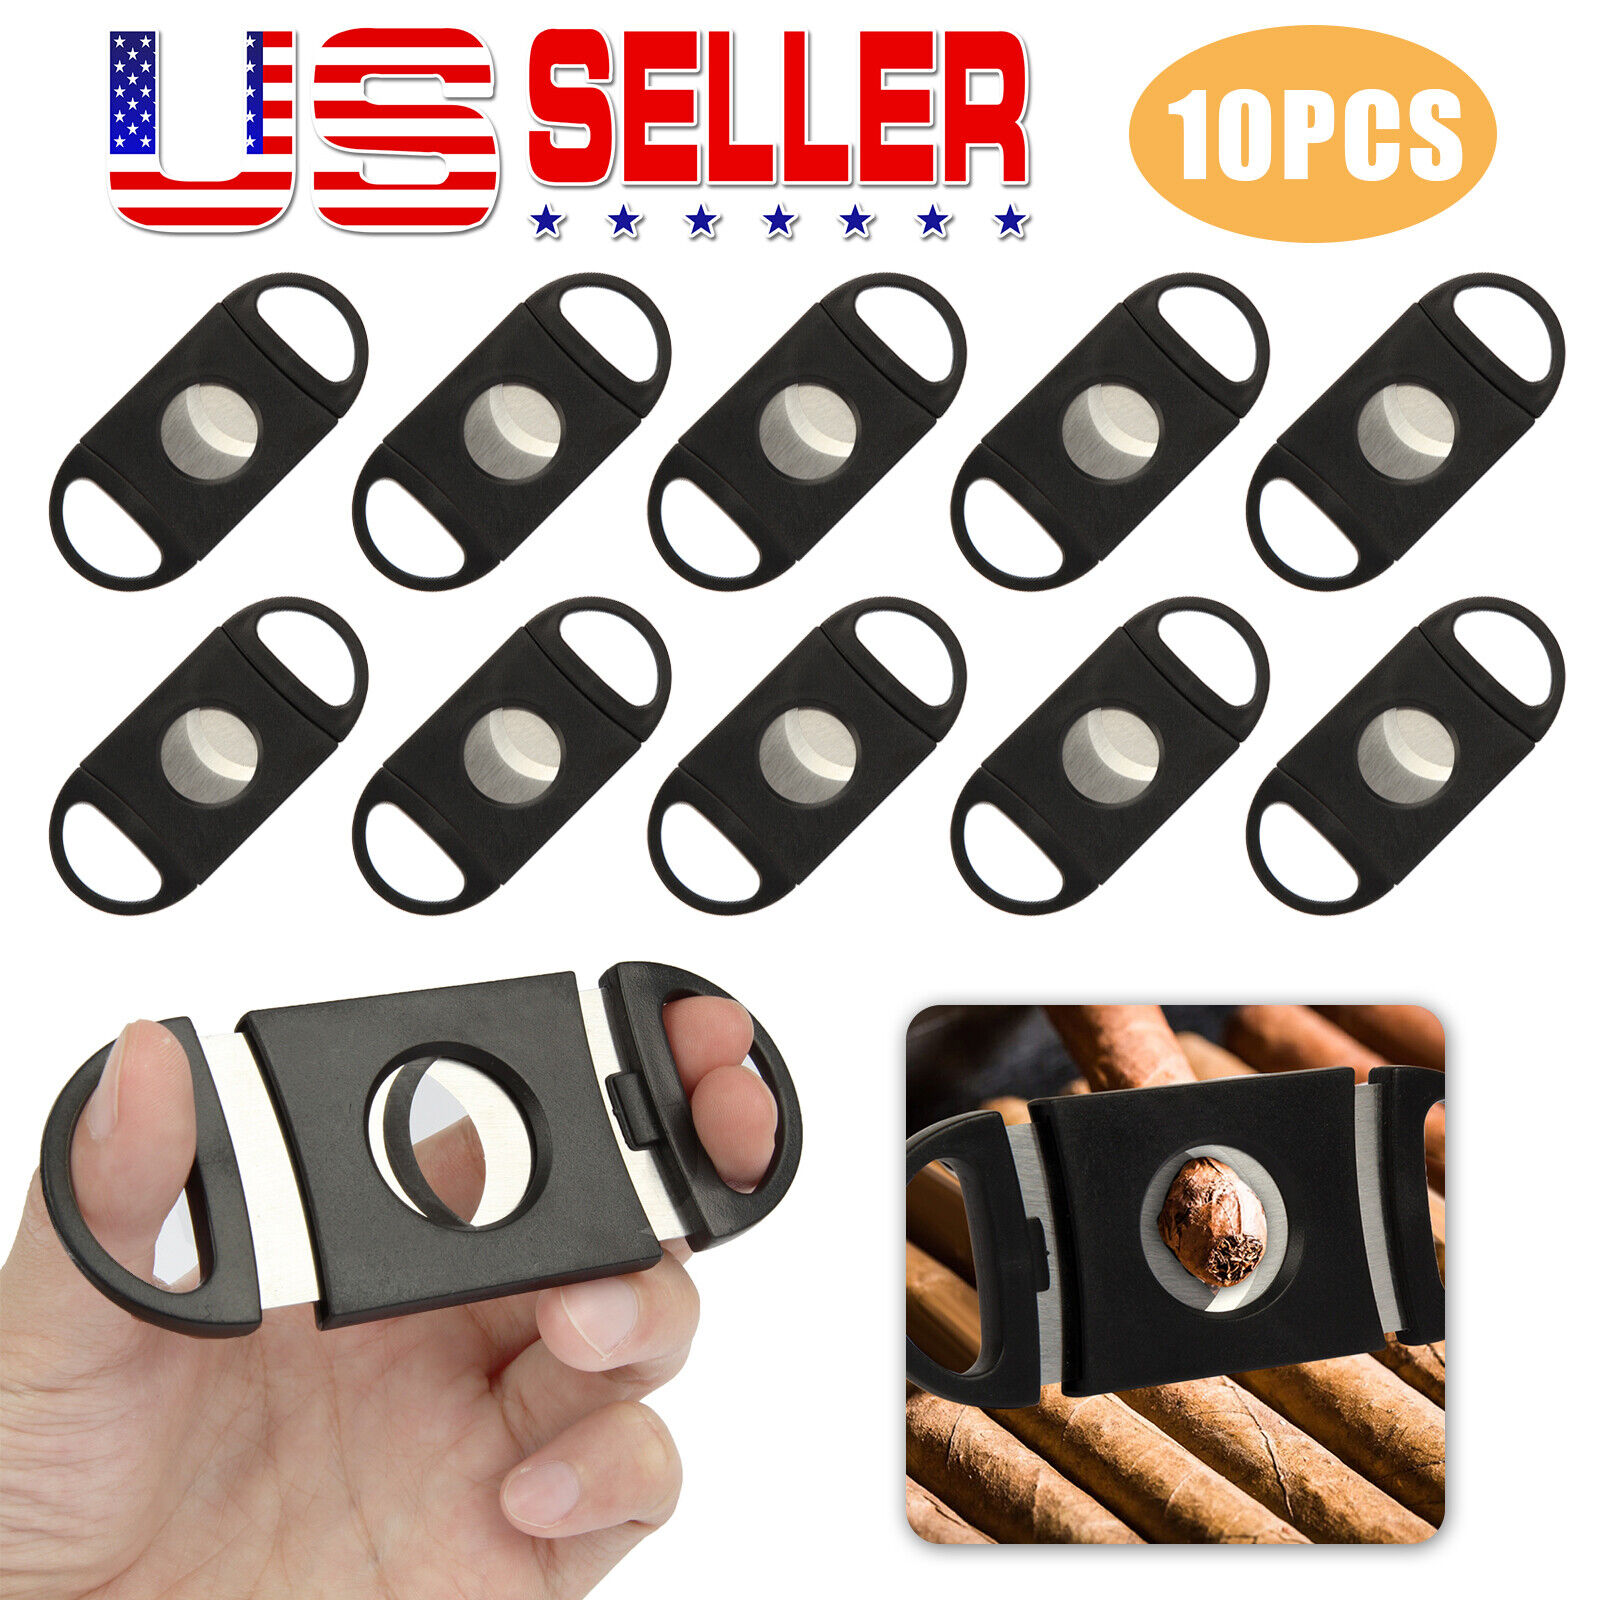 10 x Pocket Cigar Cutter Stainless Steel Double Blades Guillotine Knife Scissors